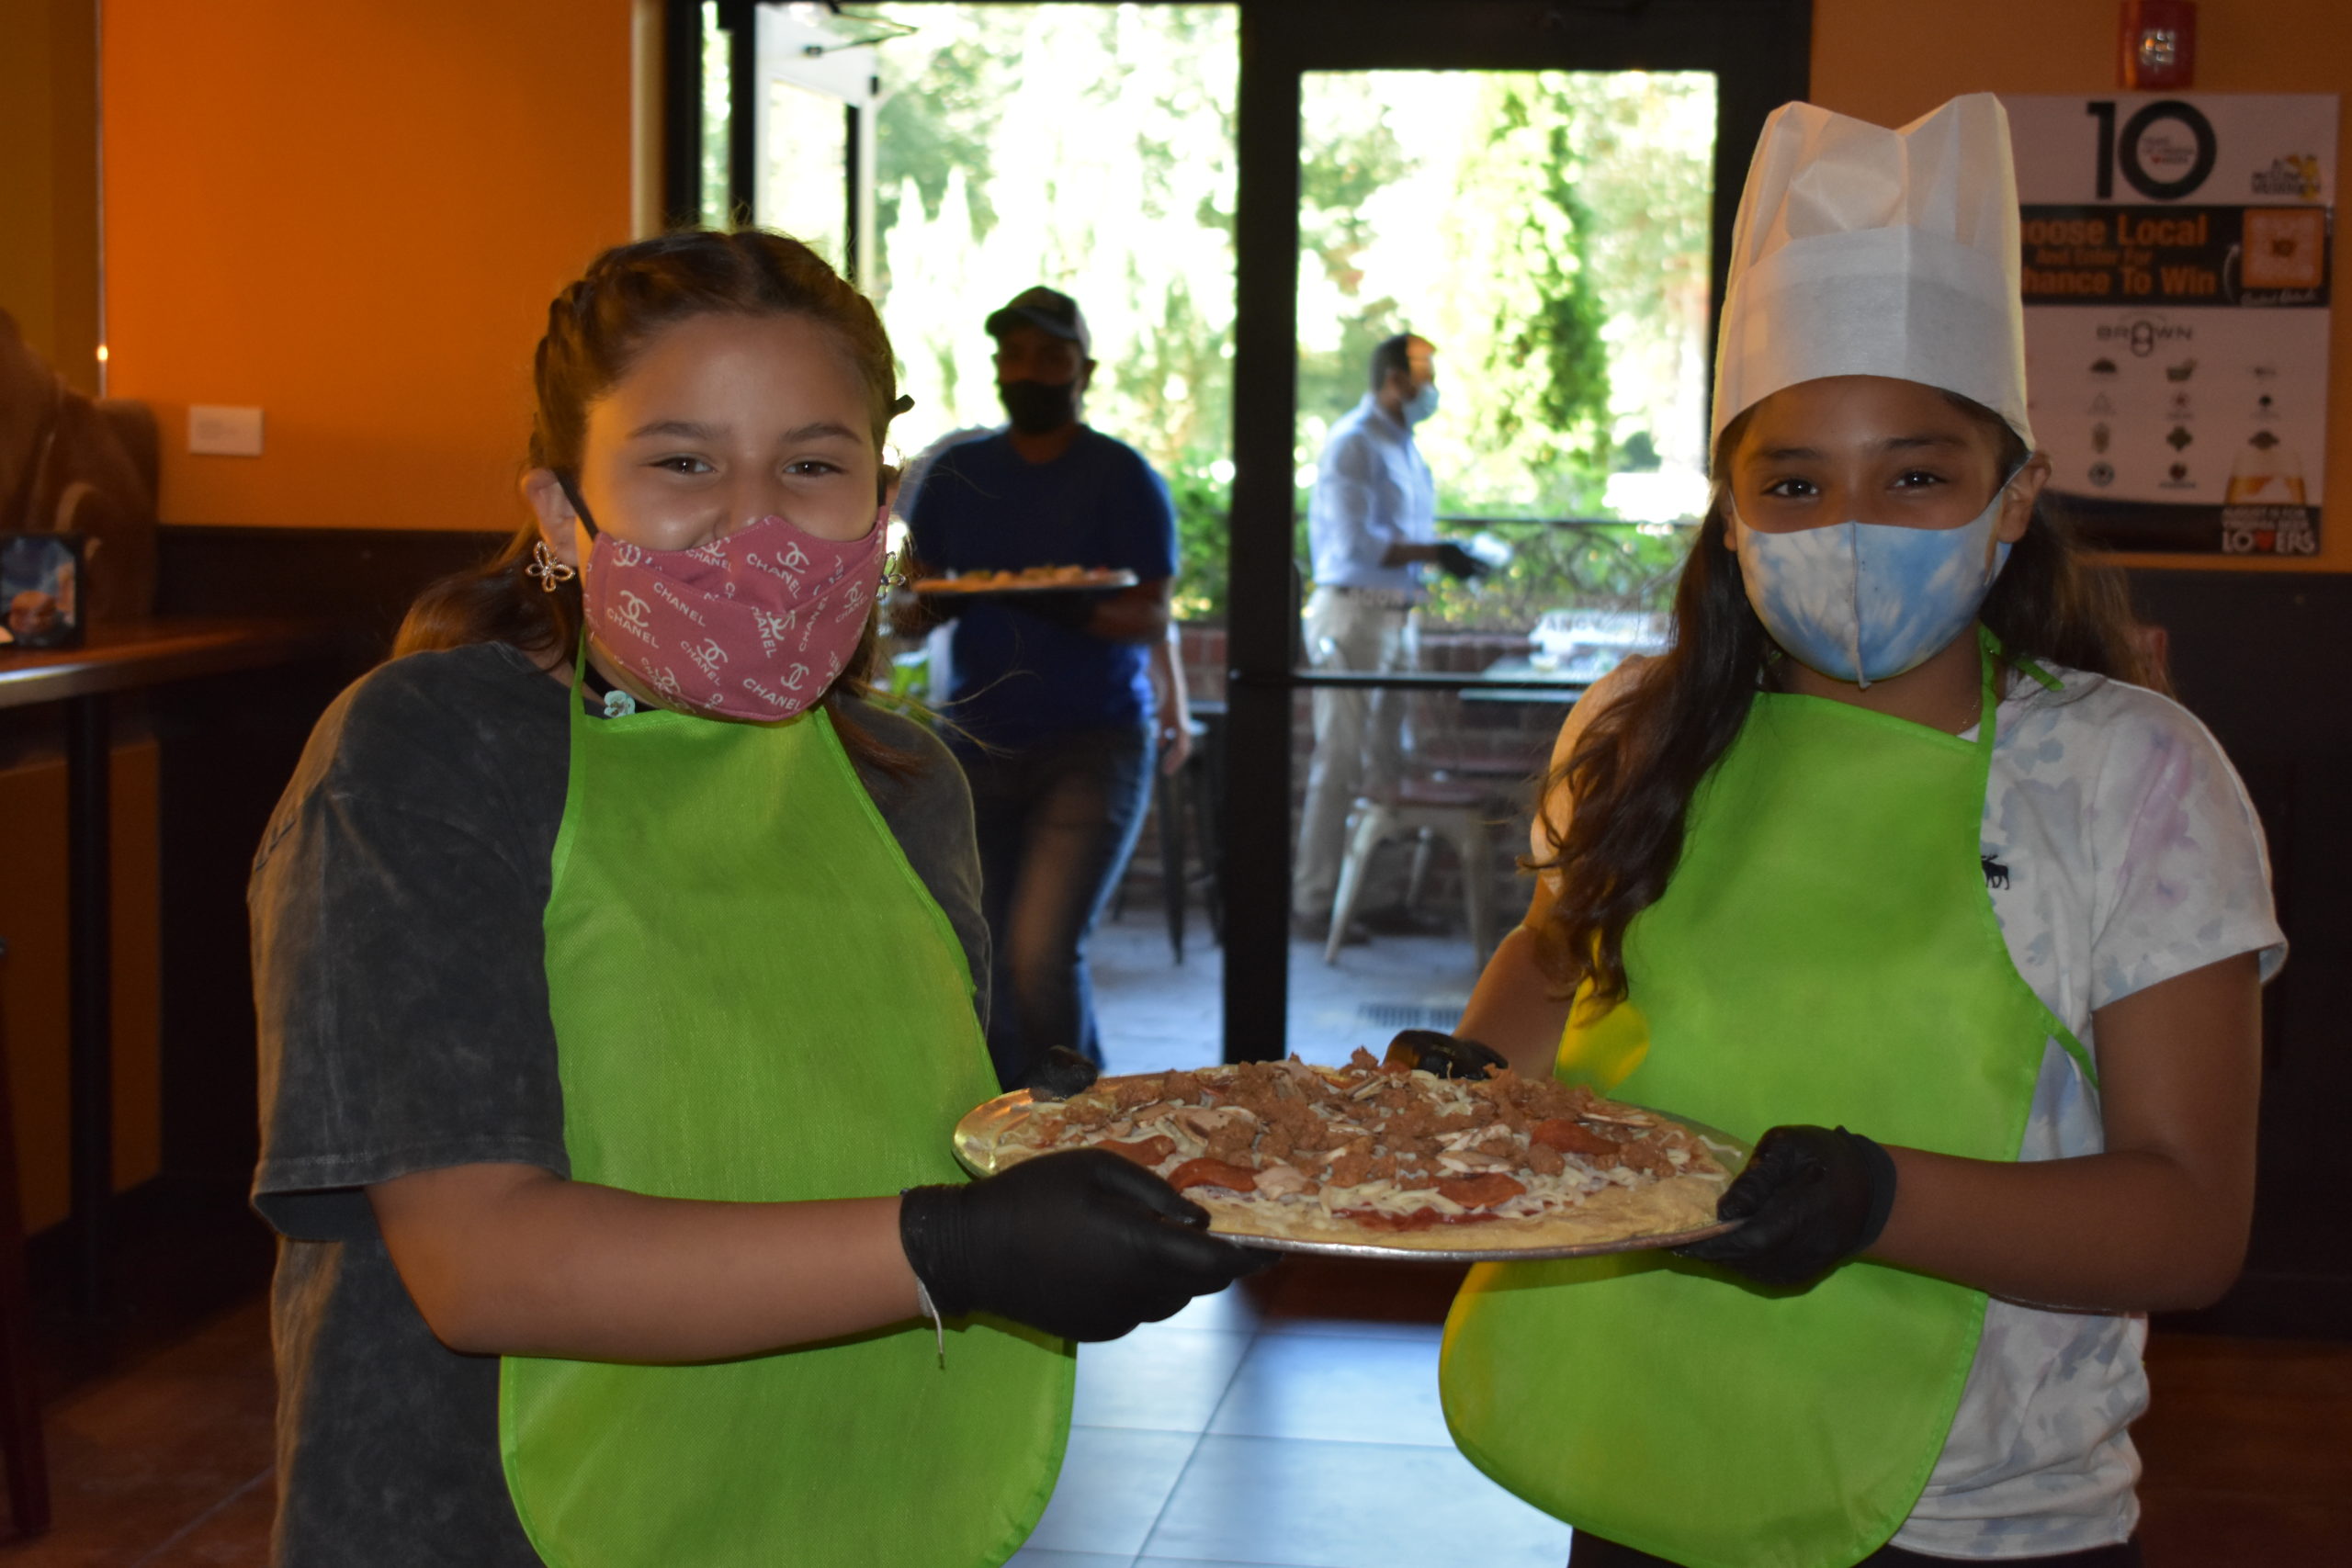 Image two children carrying a pizza into the kitchen of a restaurant